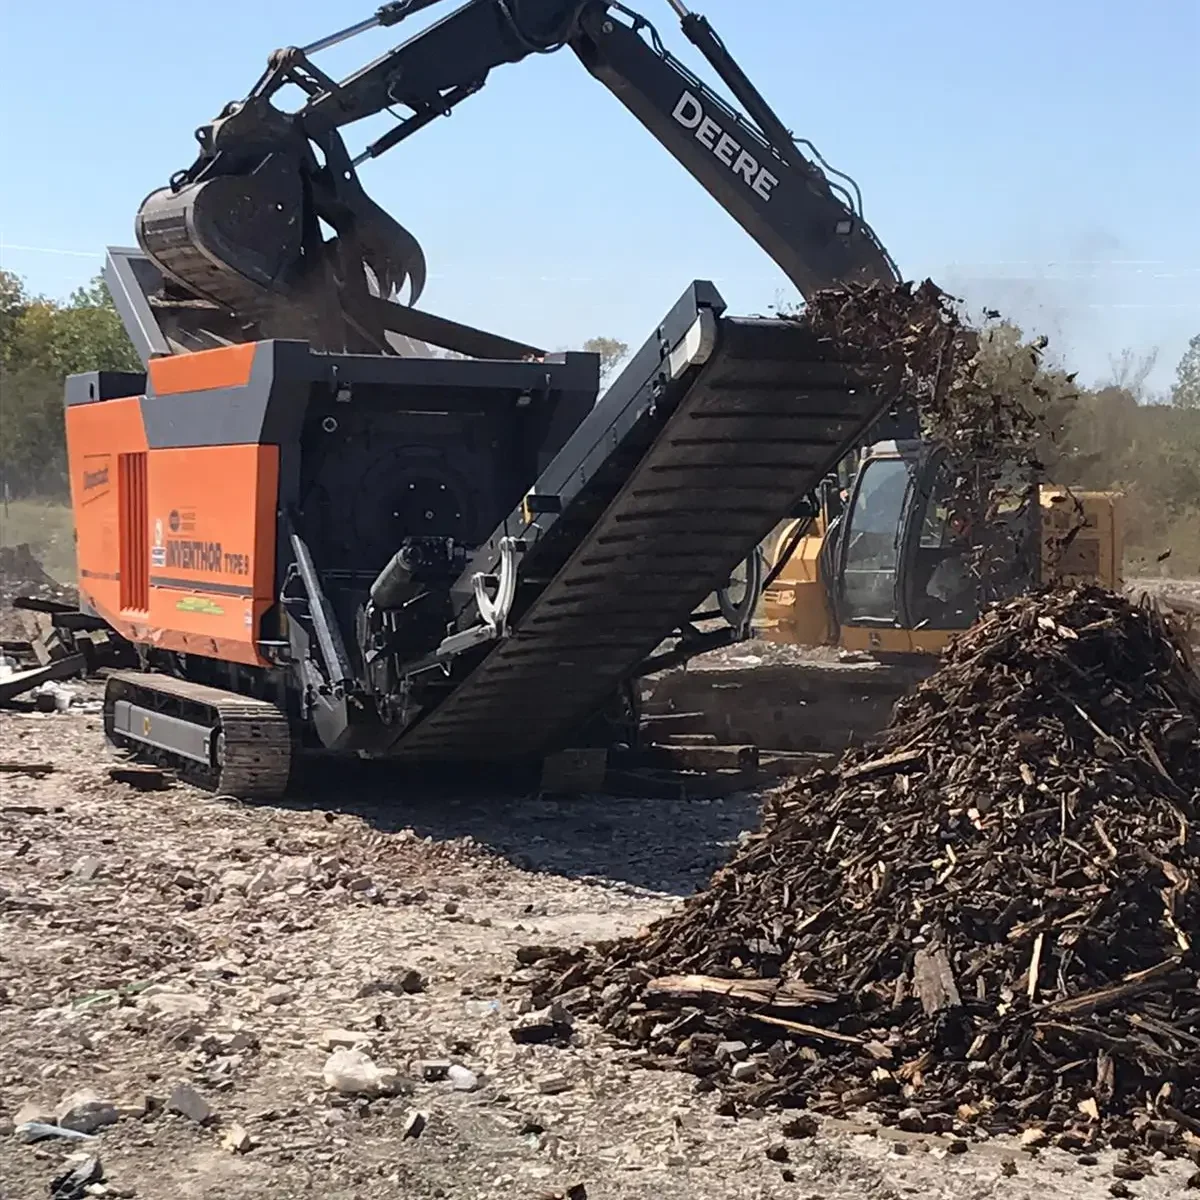 A high-torque shredder reduces the volume of railroad ties and shreds them into smaller sizes.